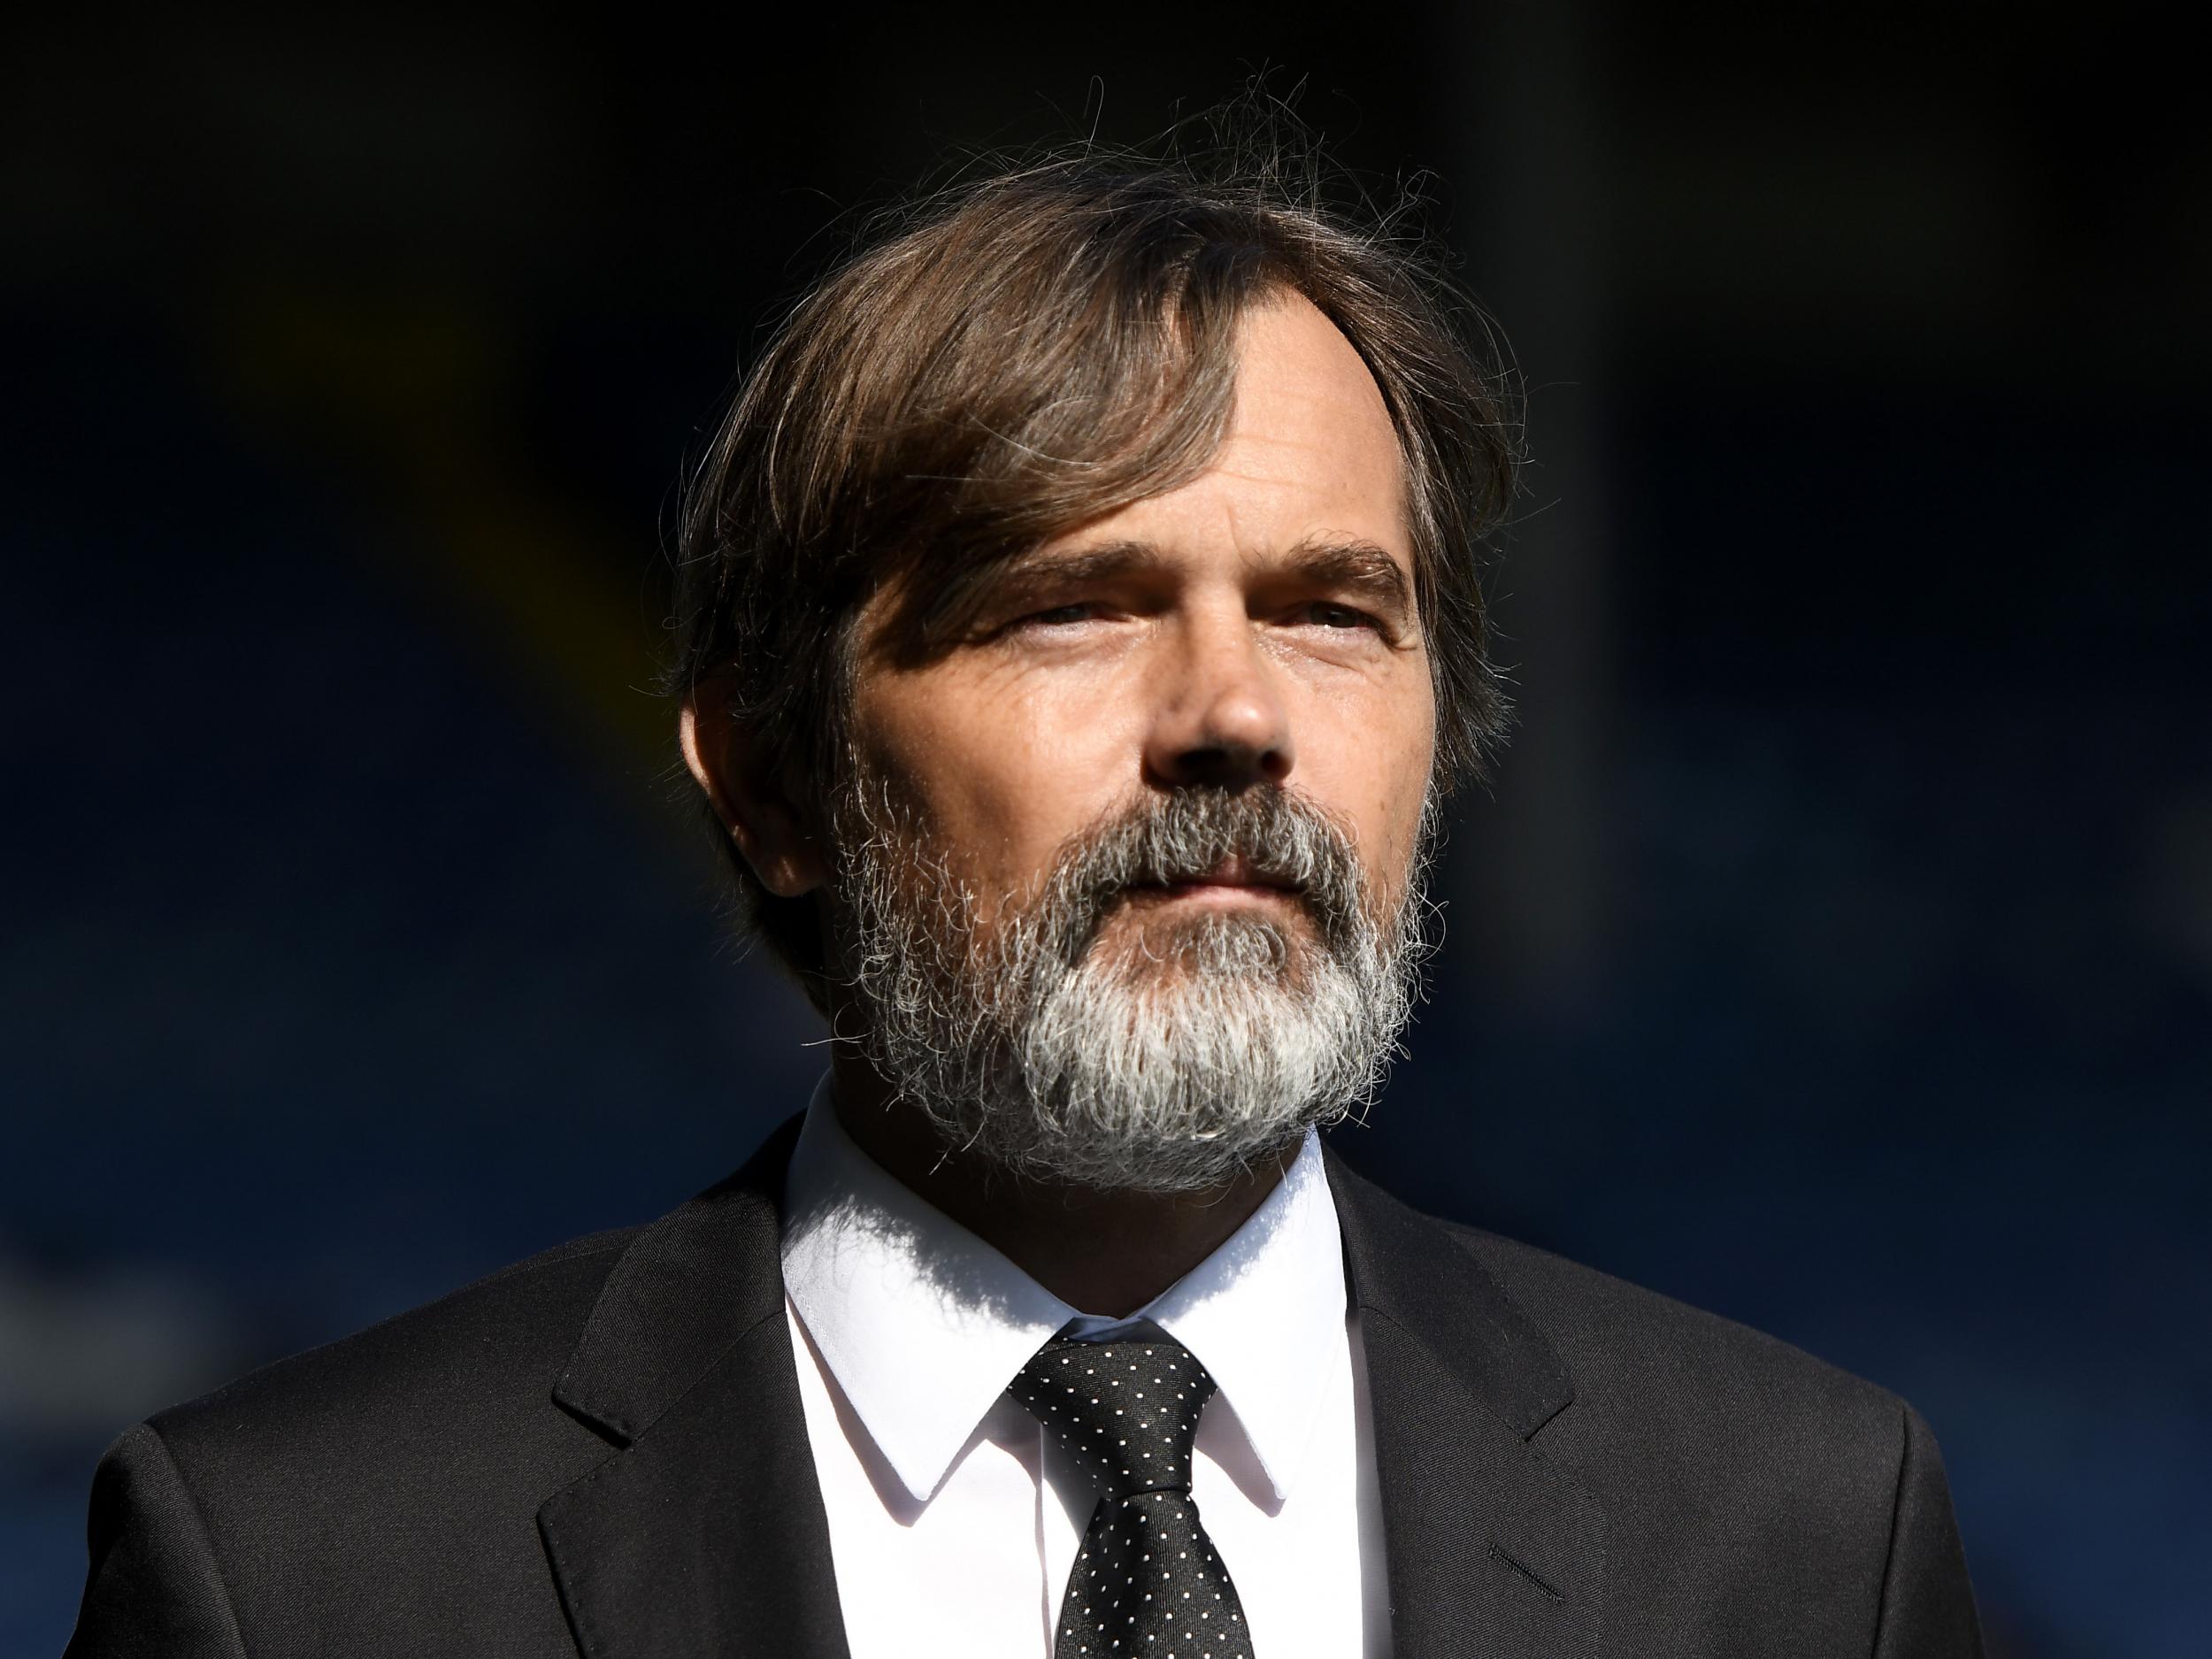 Phillip Cocu is keen for his side to focus on football after an “alcohol-related incident”